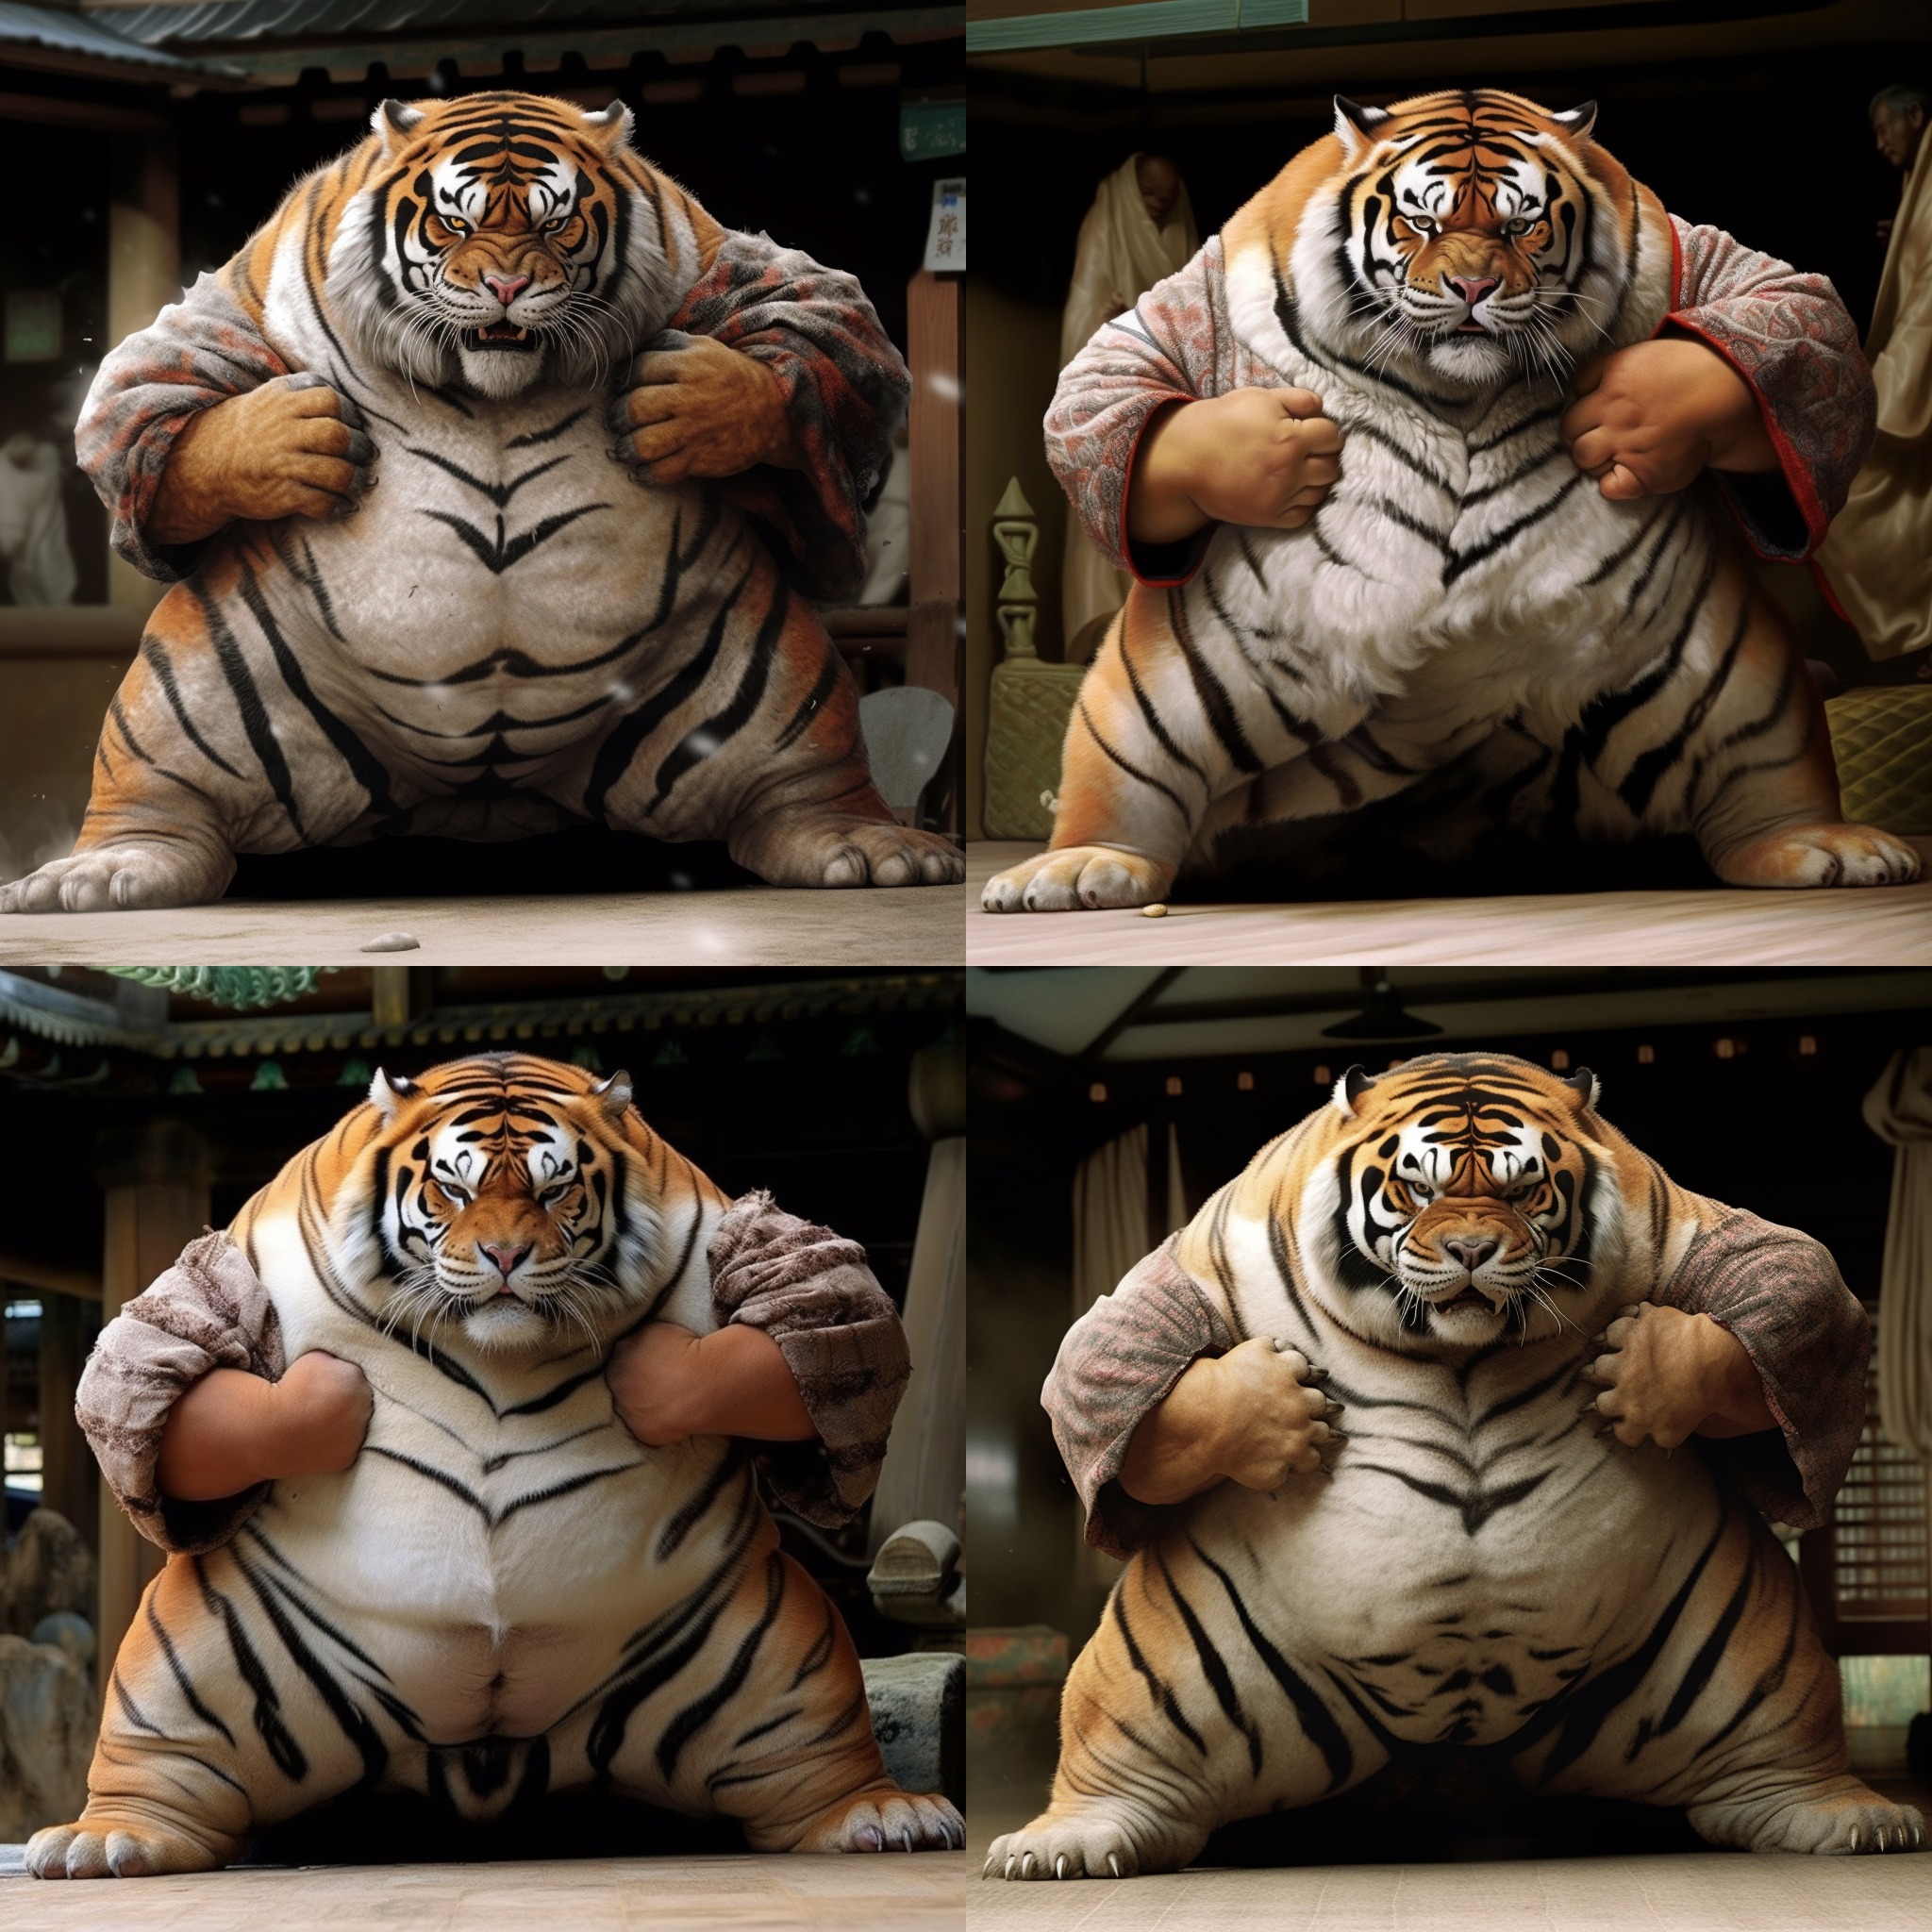 The sumo version of the tiger